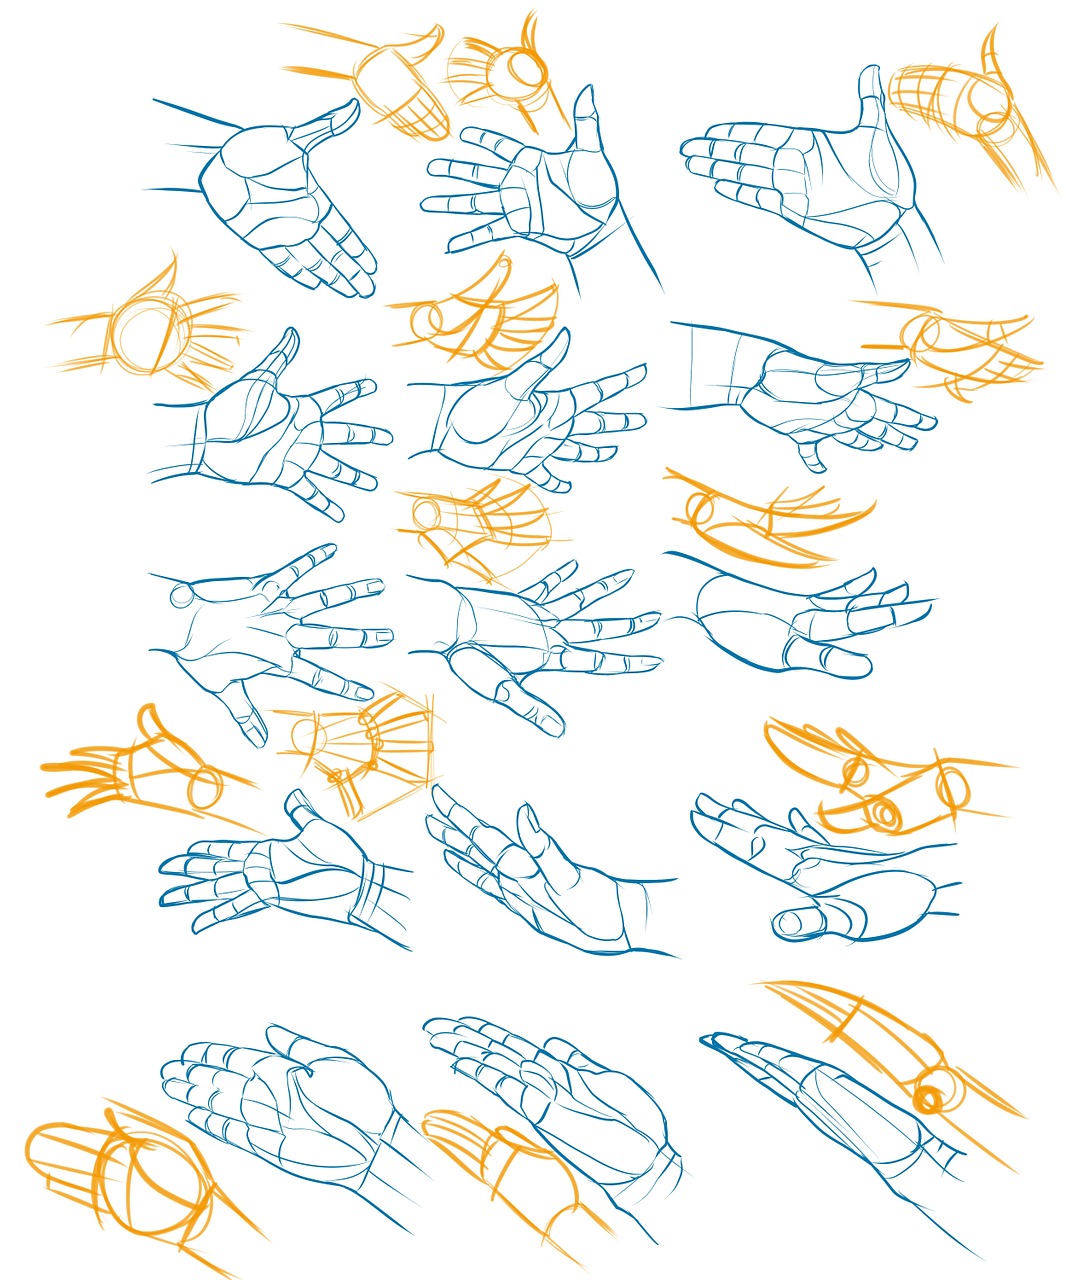 Download Free Photo Of Hands Reference Drawing Poses Free Pictures From Needpix Com